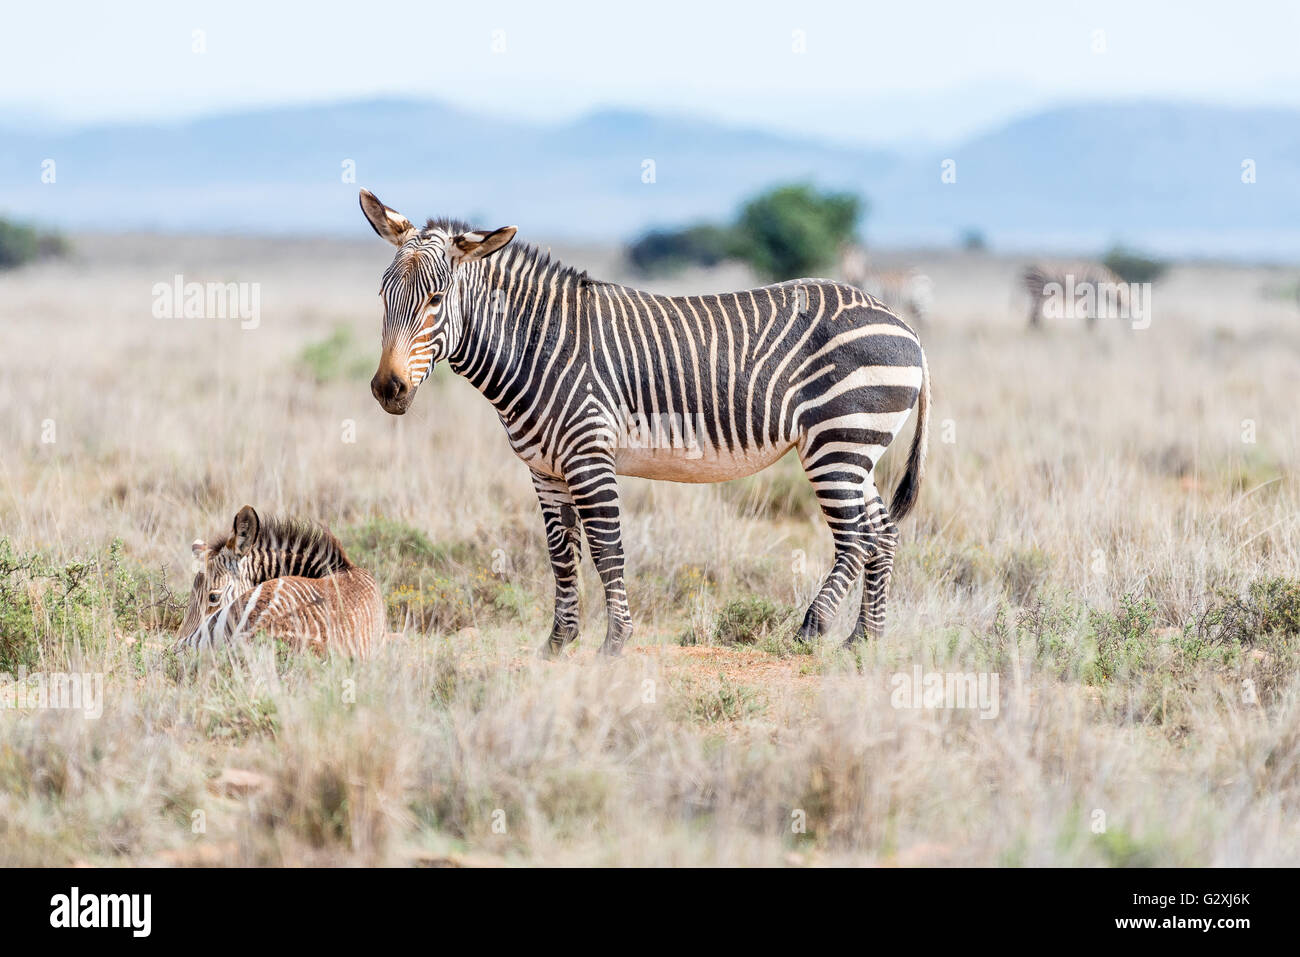 A mountain zebra mare, Equus zebra zebra, with foal laying in grass near Cradock in South Africa Stock Photo